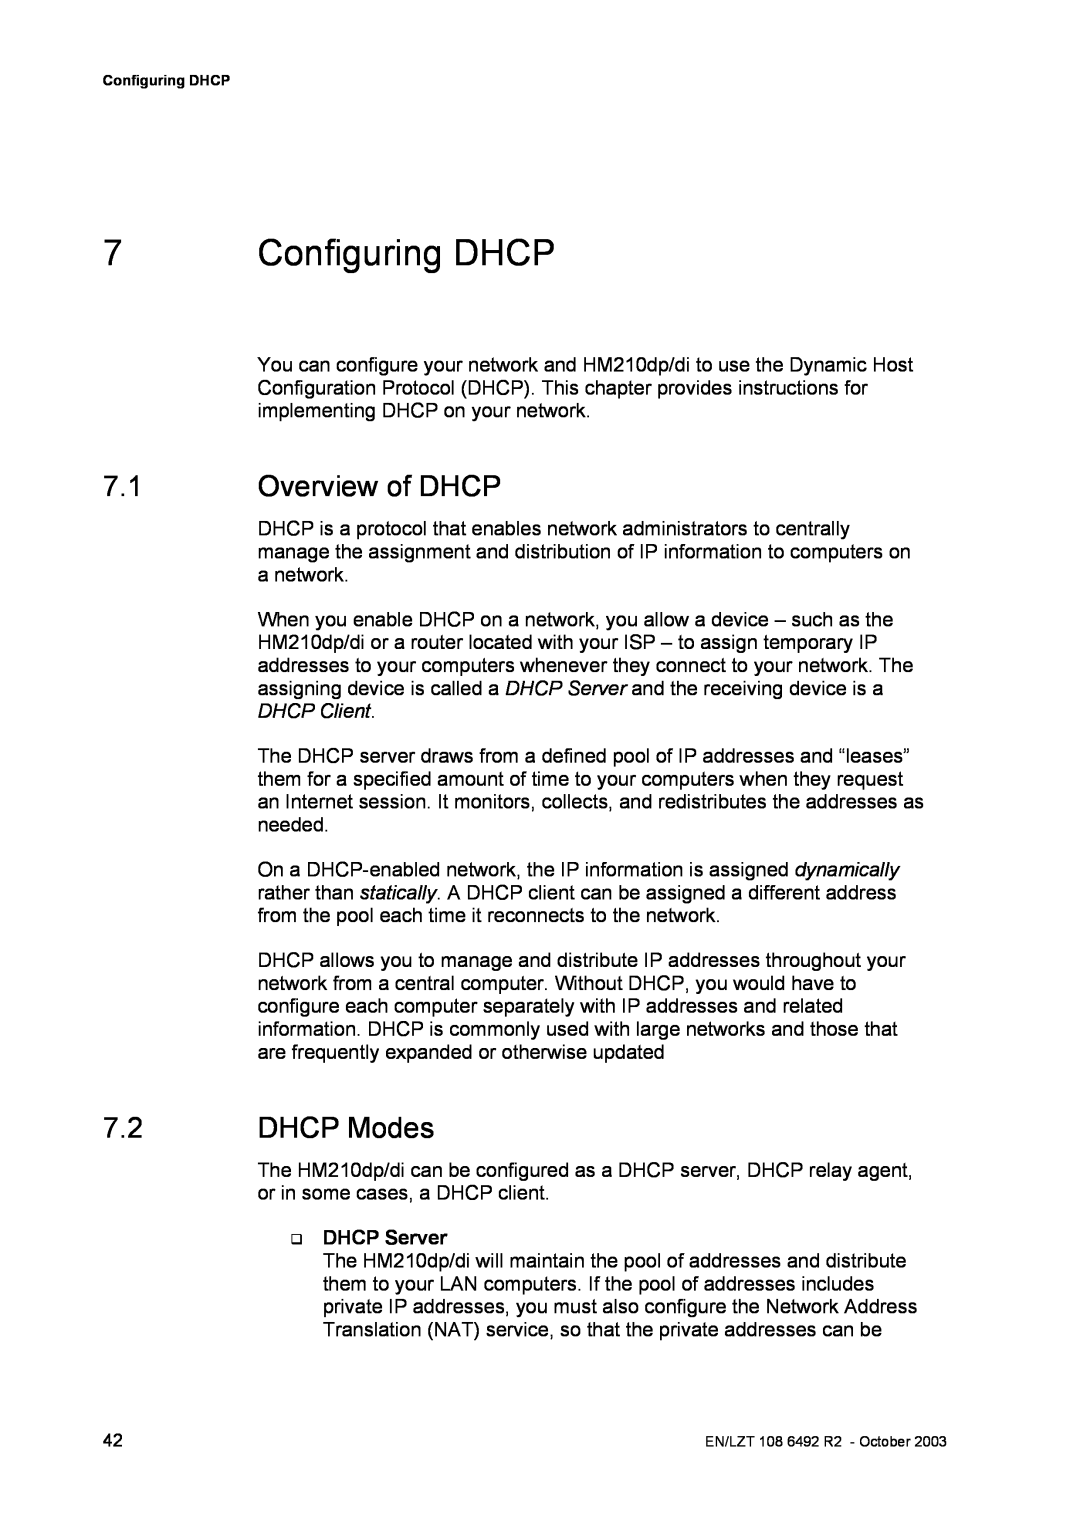 Garmin HM210DP/DI manual Configuring DHCP, Overview of DHCP, DHCP Modes, DHCP Server 